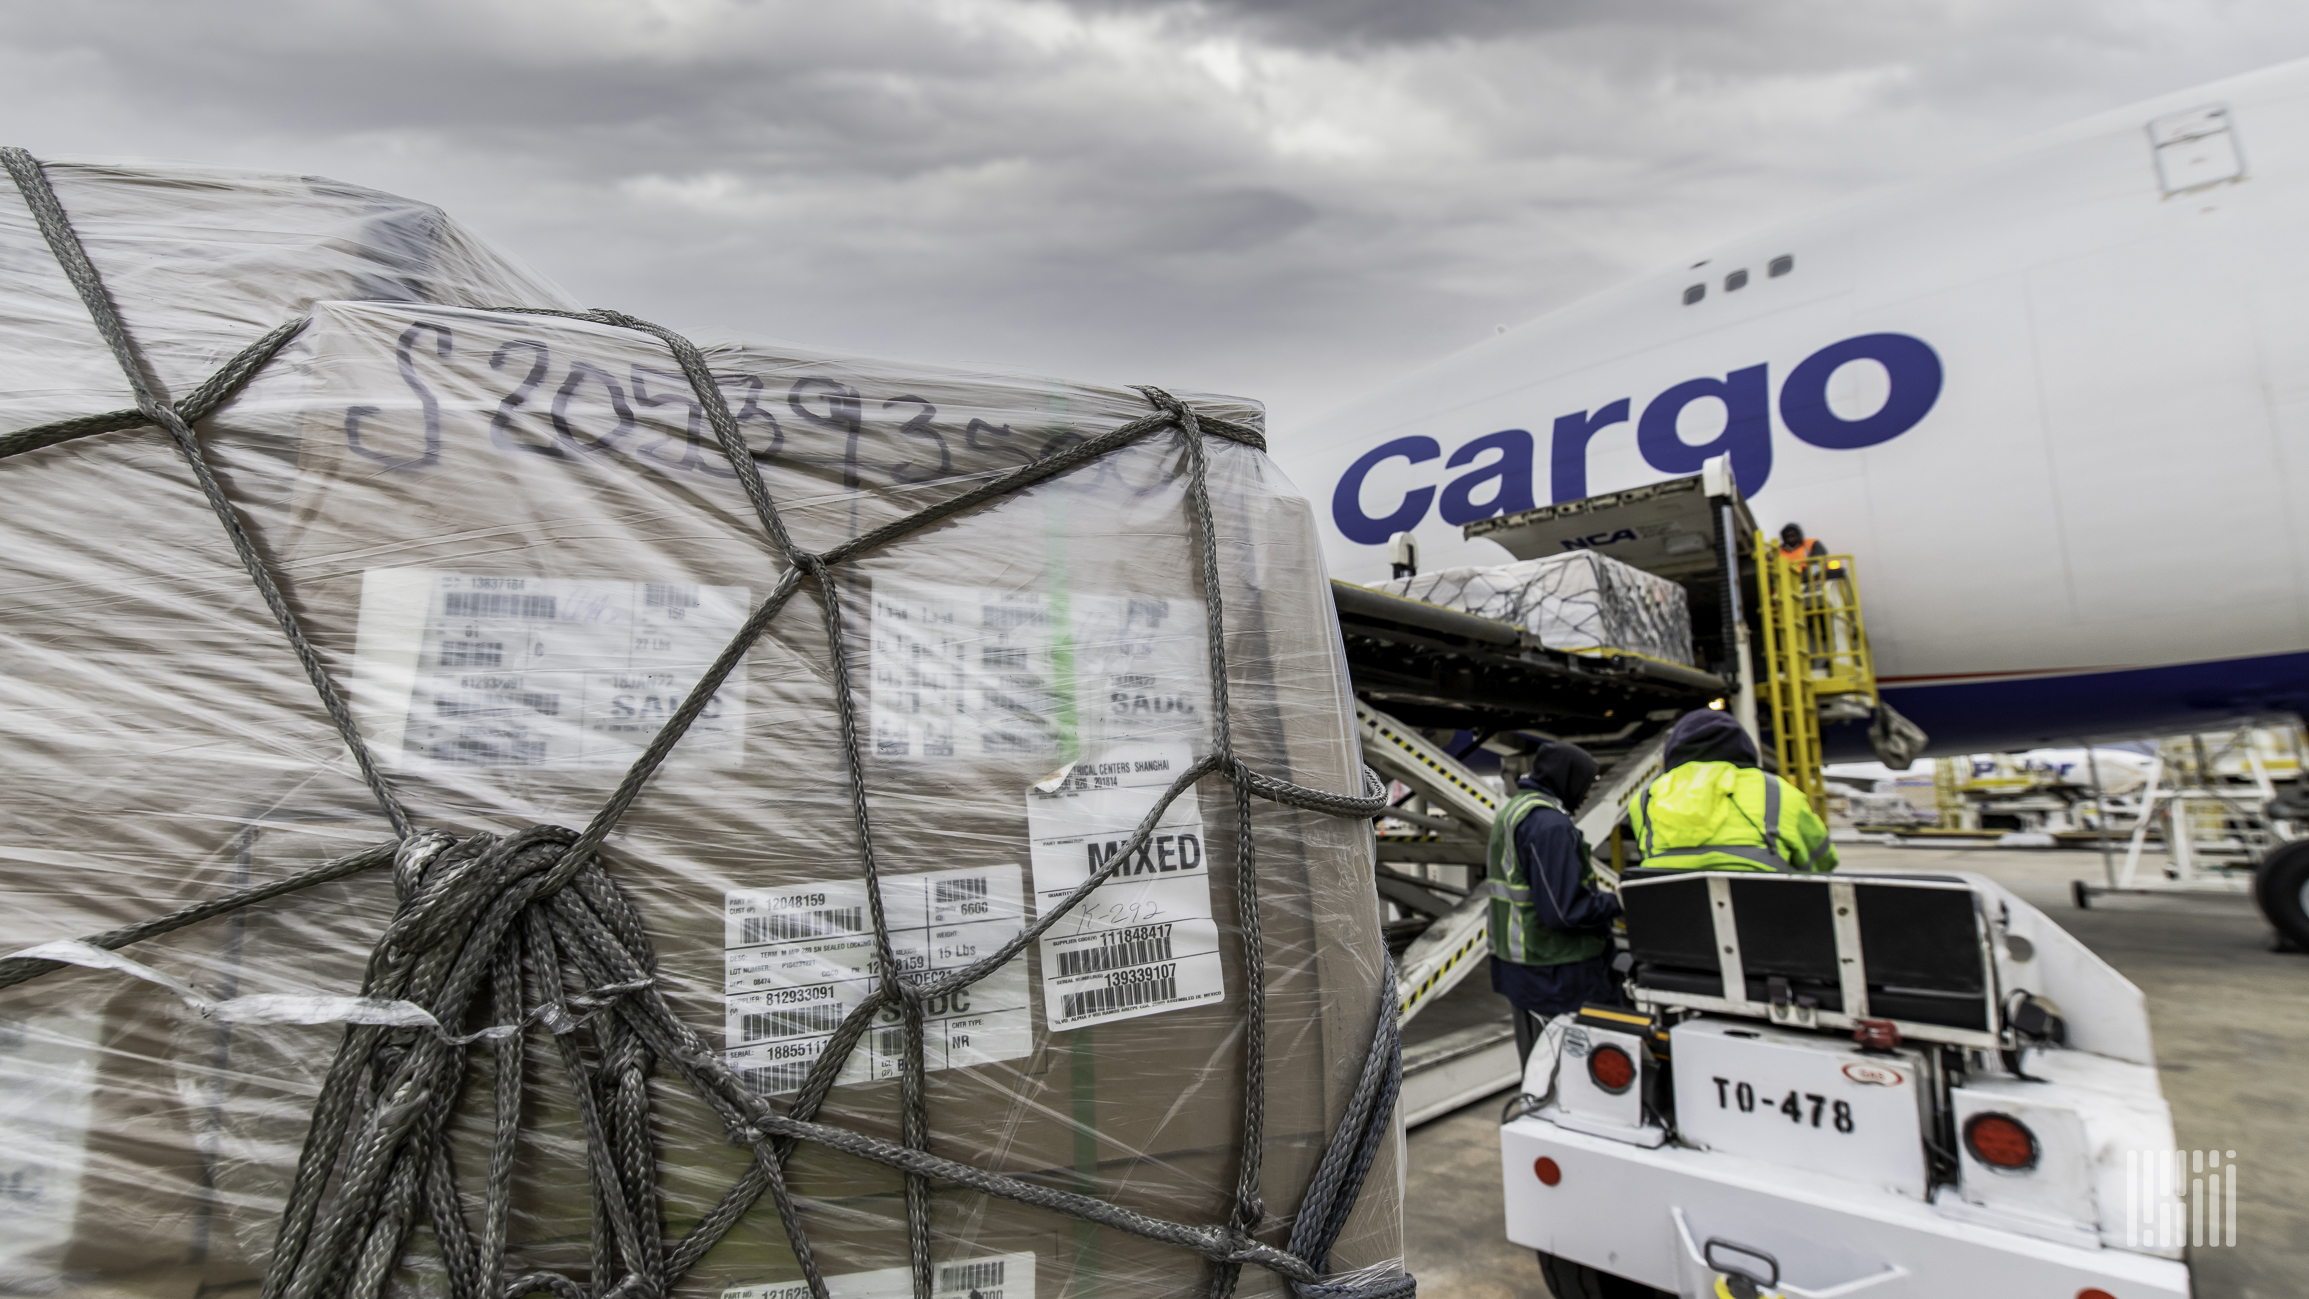 Air cargo market rides an incoming wave, but can it last?